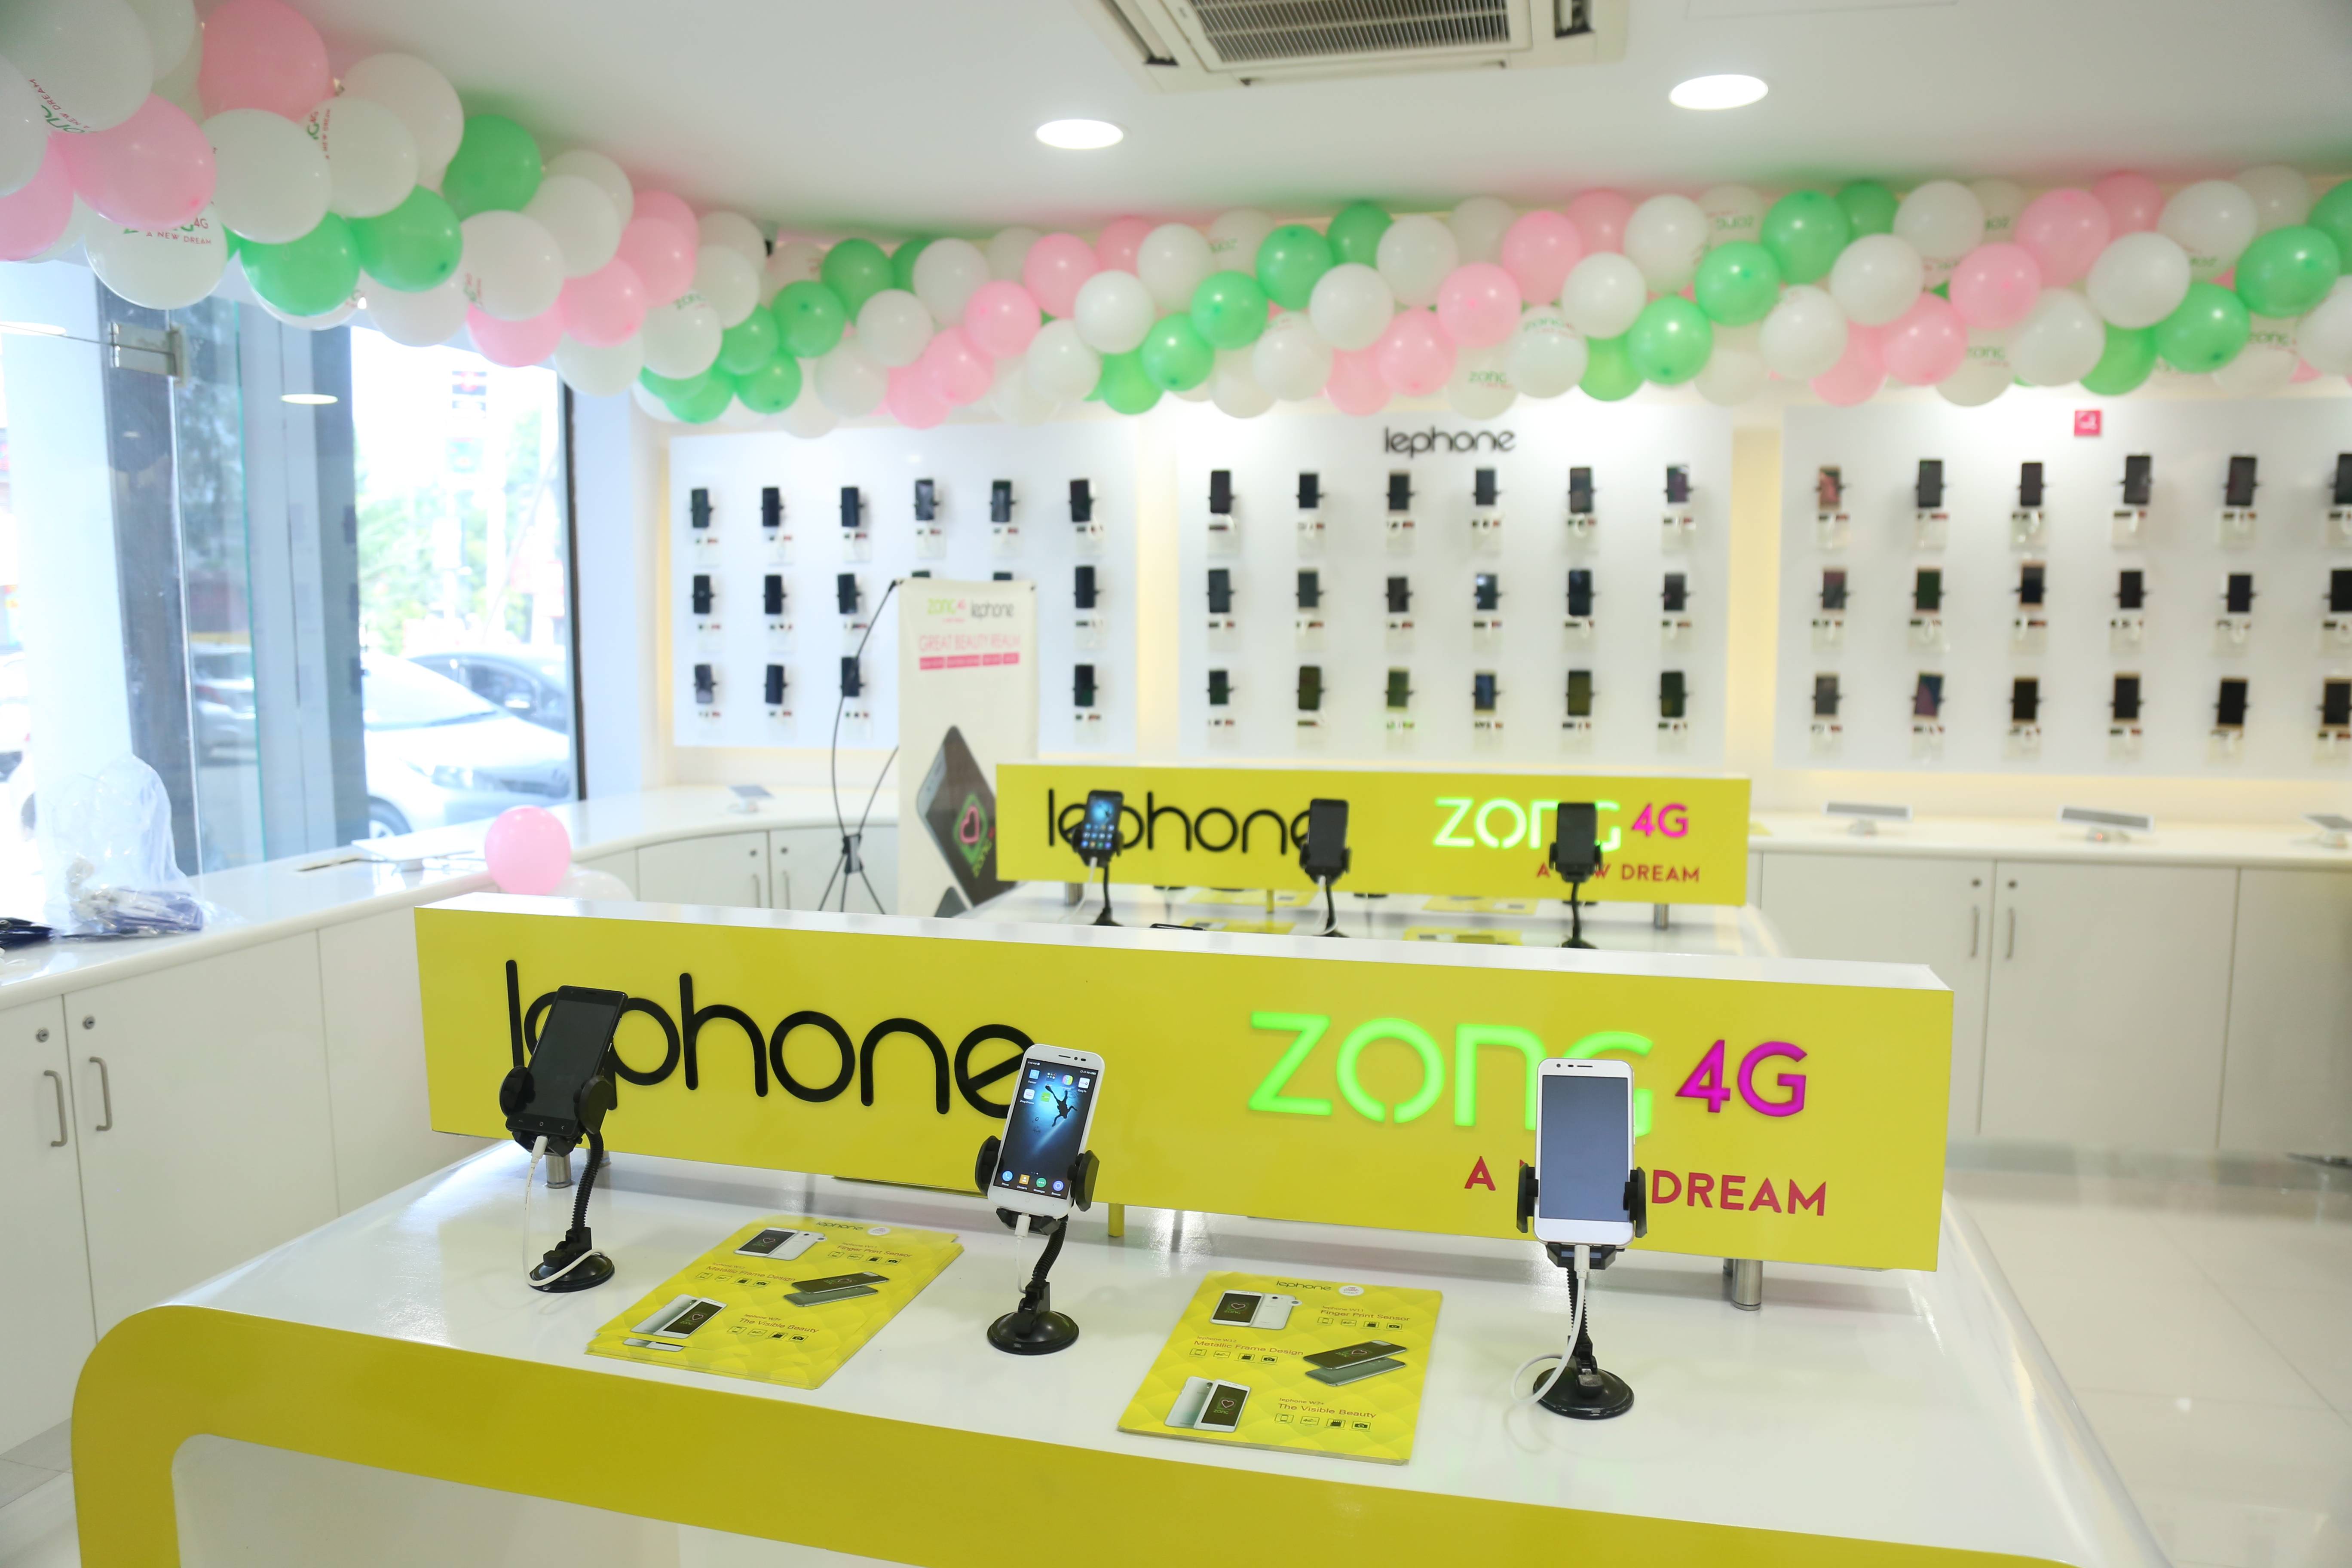 Following 3 Handset Models Shall Be Available To Customers Across Selected Zong 4G Outlets, Starting 21st Of July, 2017